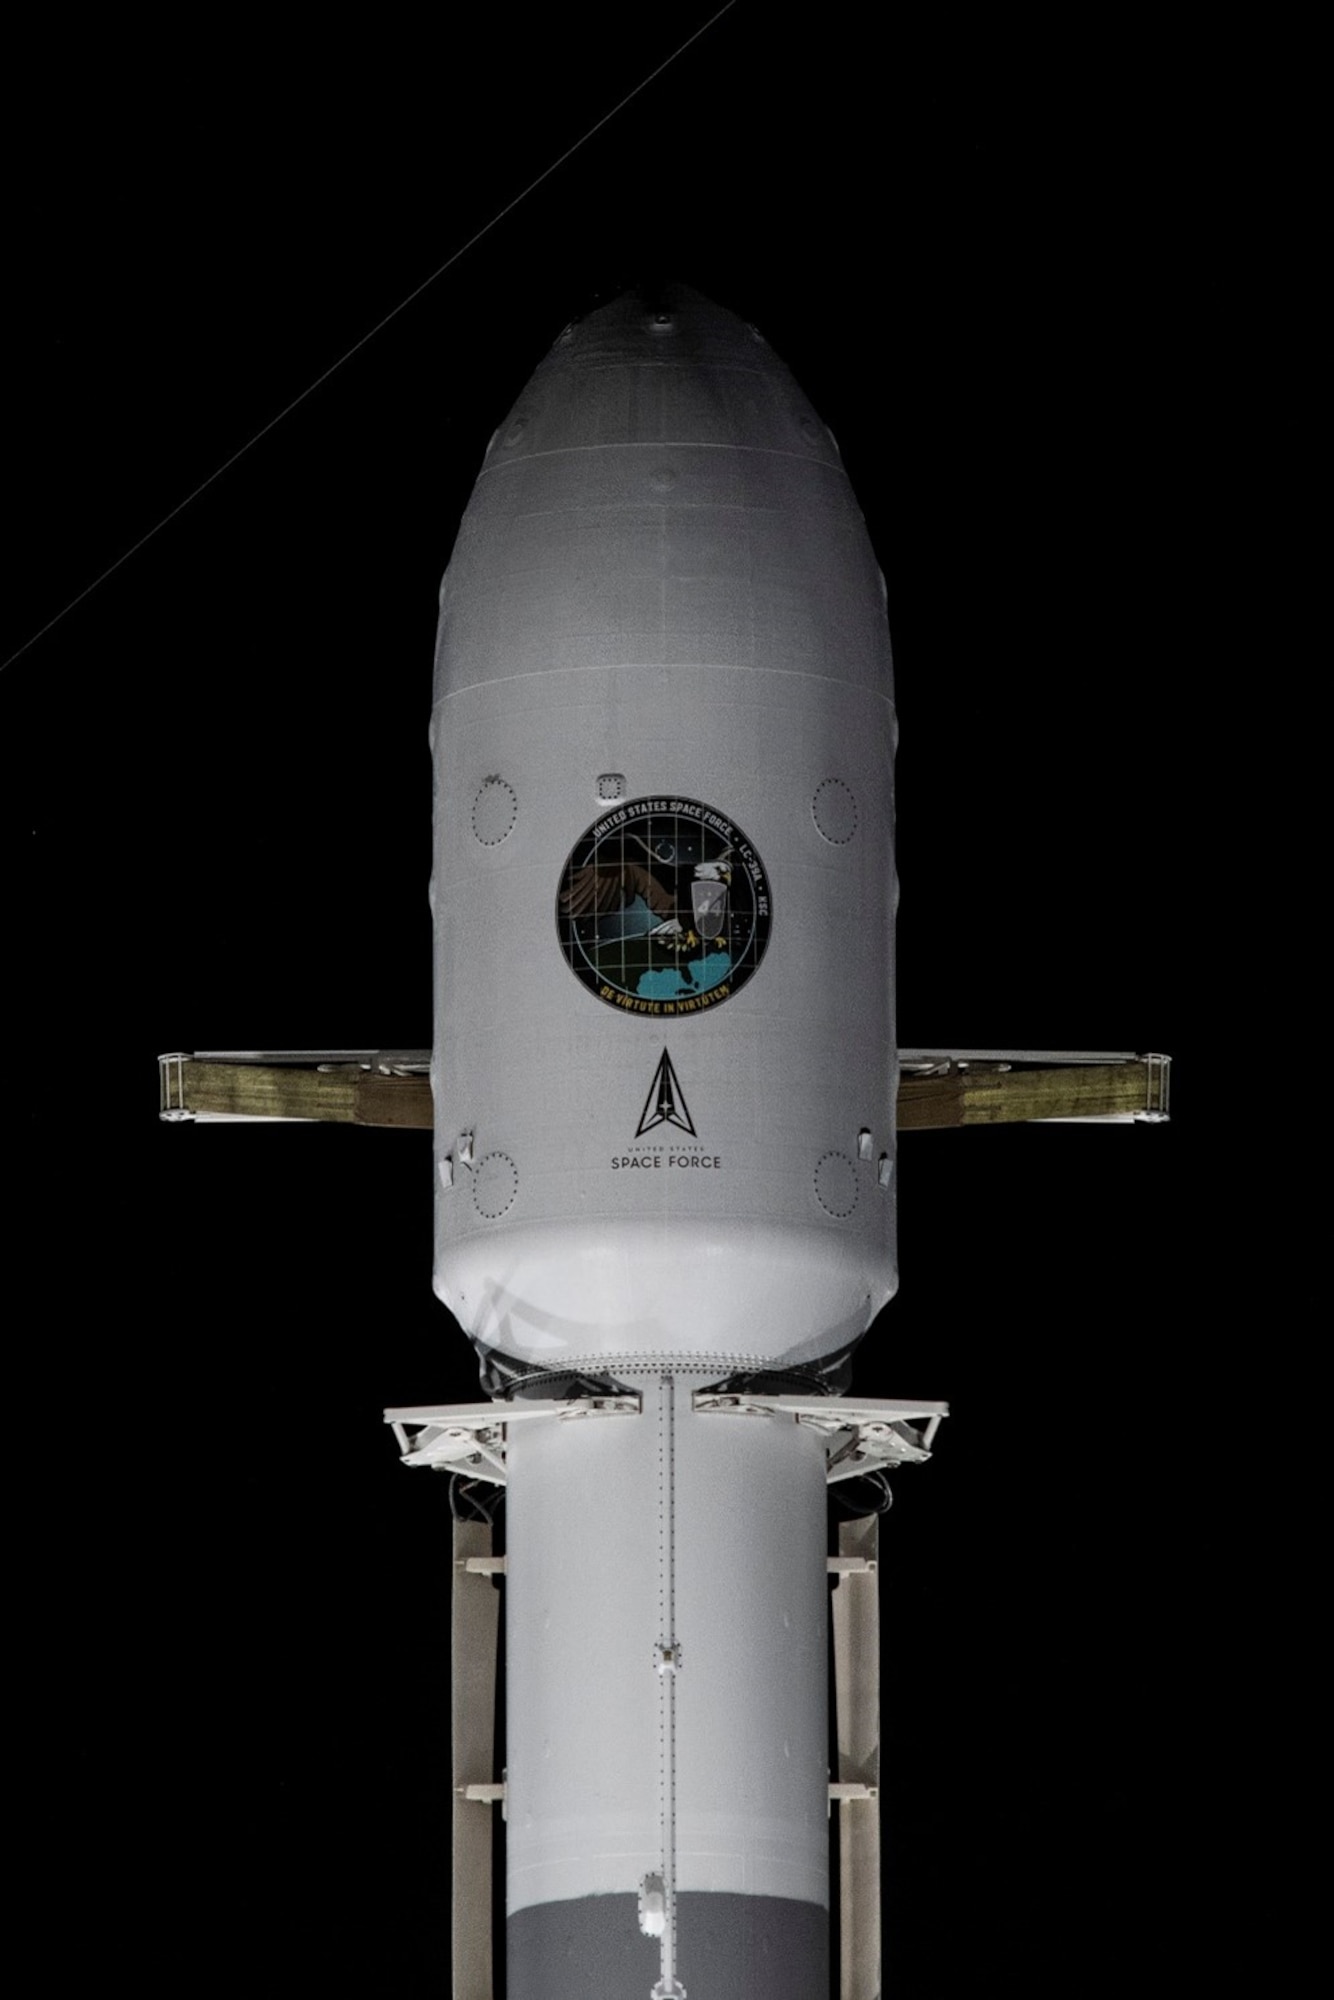 A close-up of USSF-44 prior to launch. Photo courtesy of SpaceX